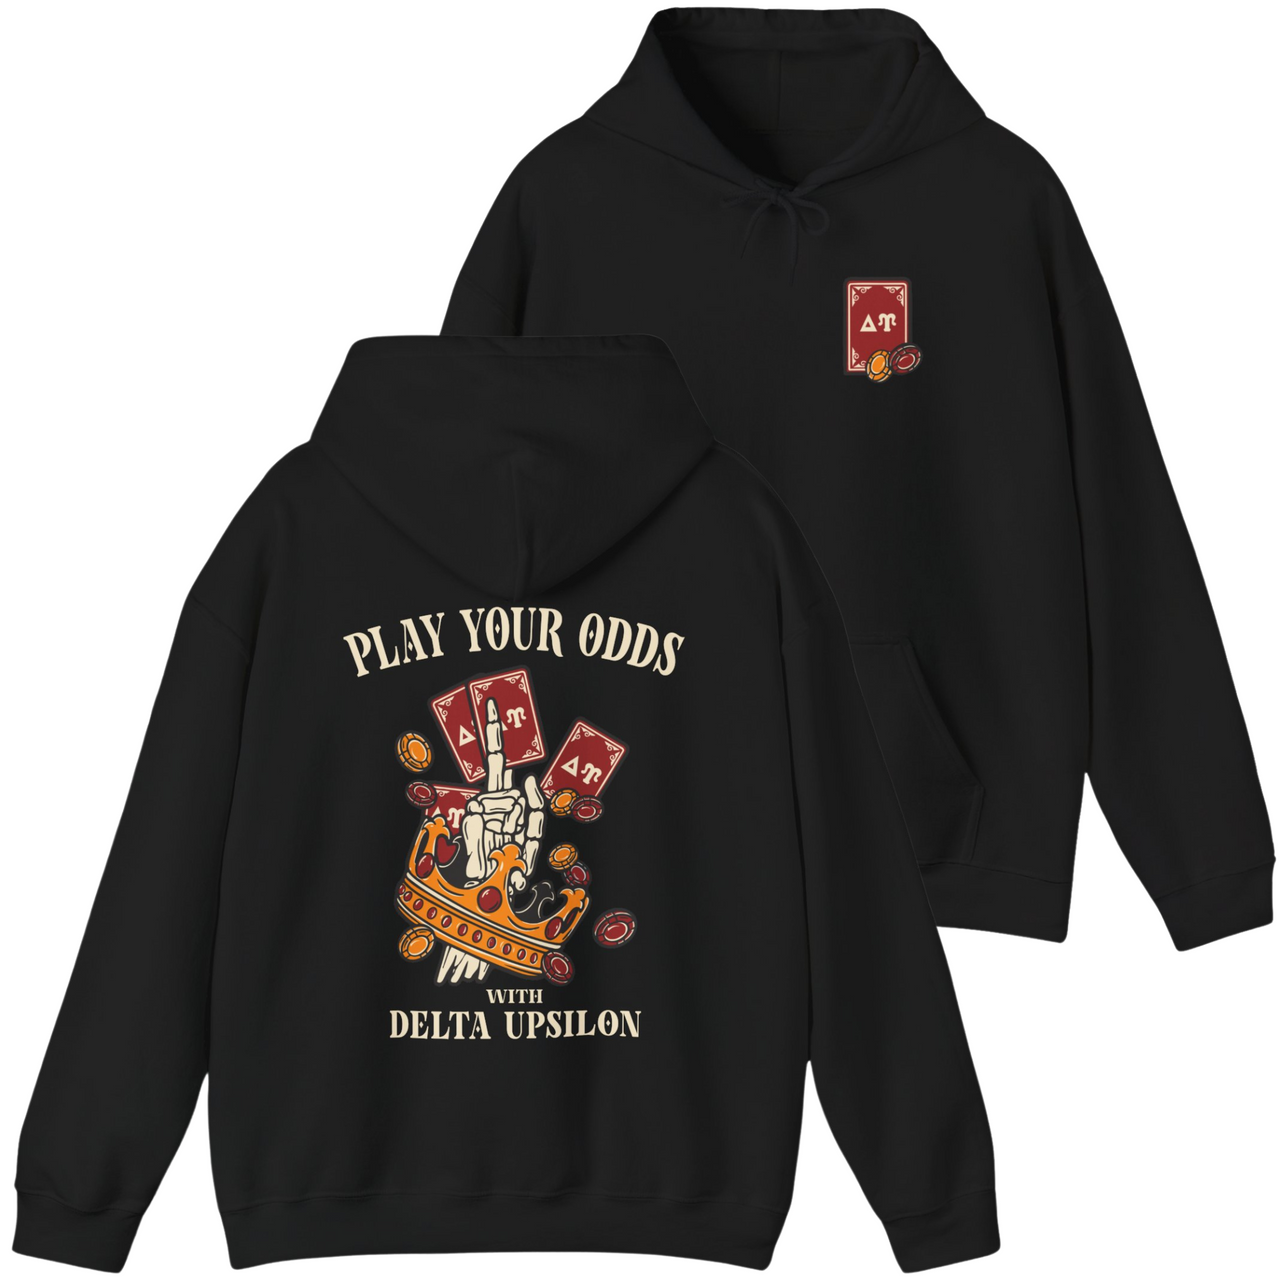 Delta Upsilon Graphic Hoodie | Play Your Odds